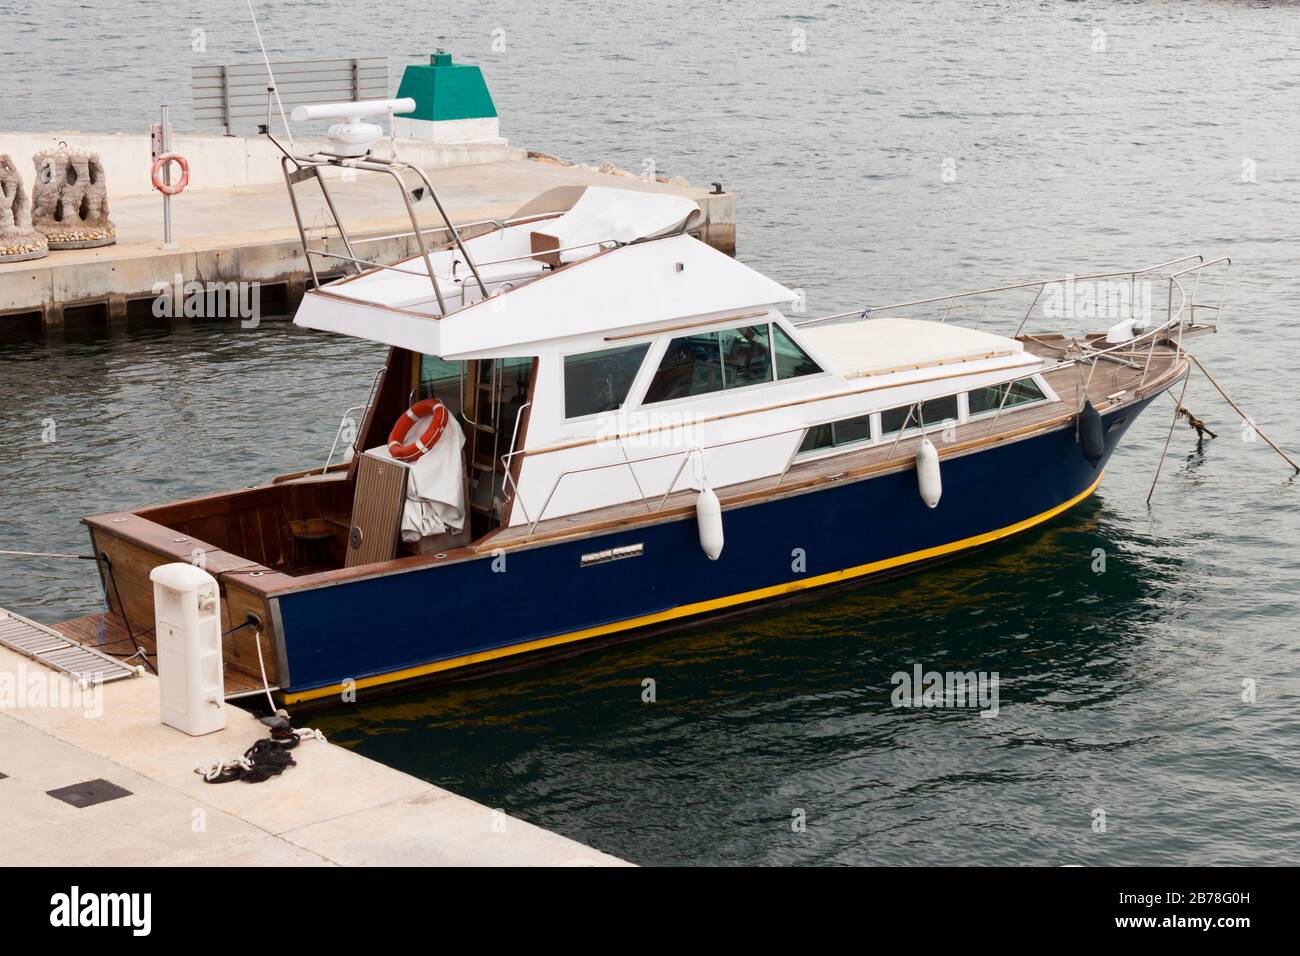 Recreational old wooden yacht  moored in the pier. Stock Photo